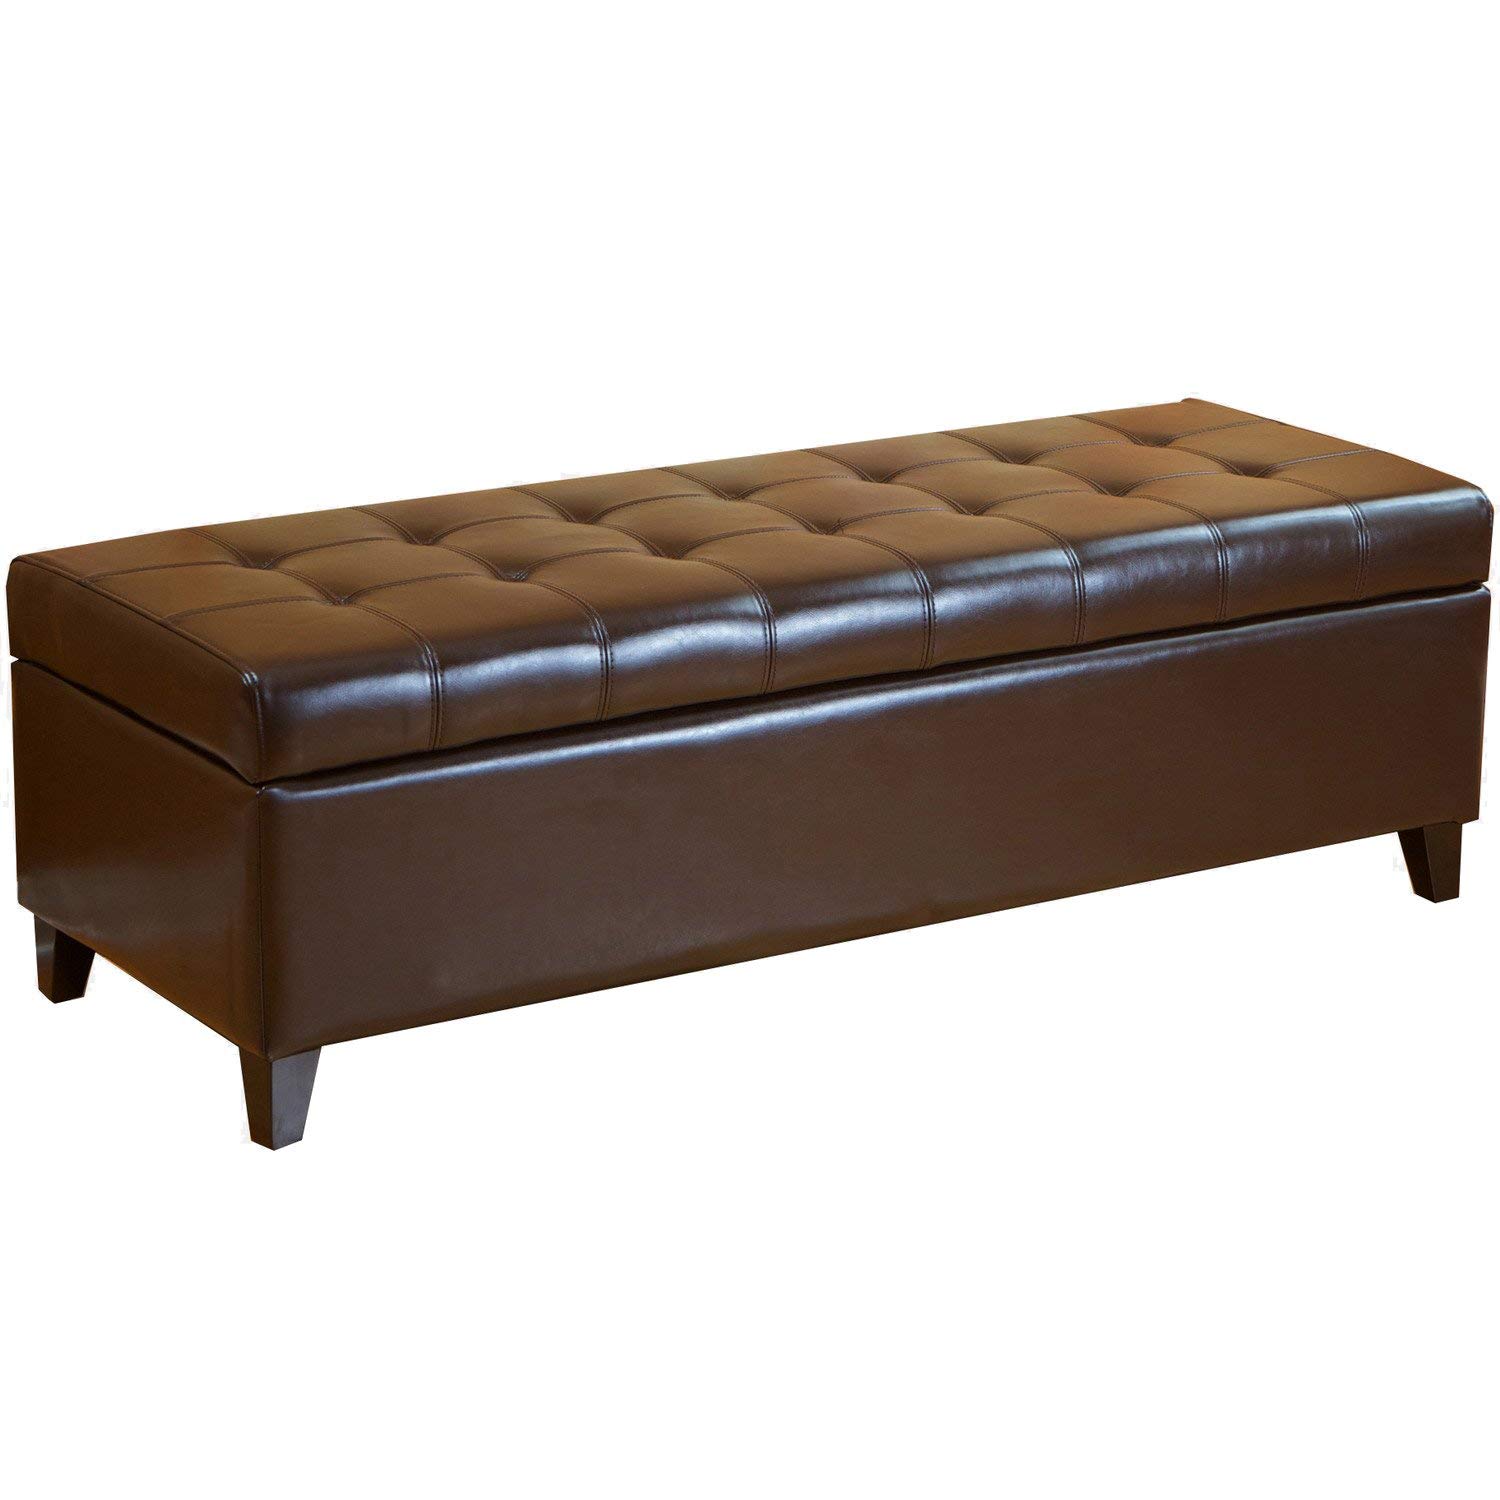 Best Selling Mission Brown Tufted Leather Storage Ottoman